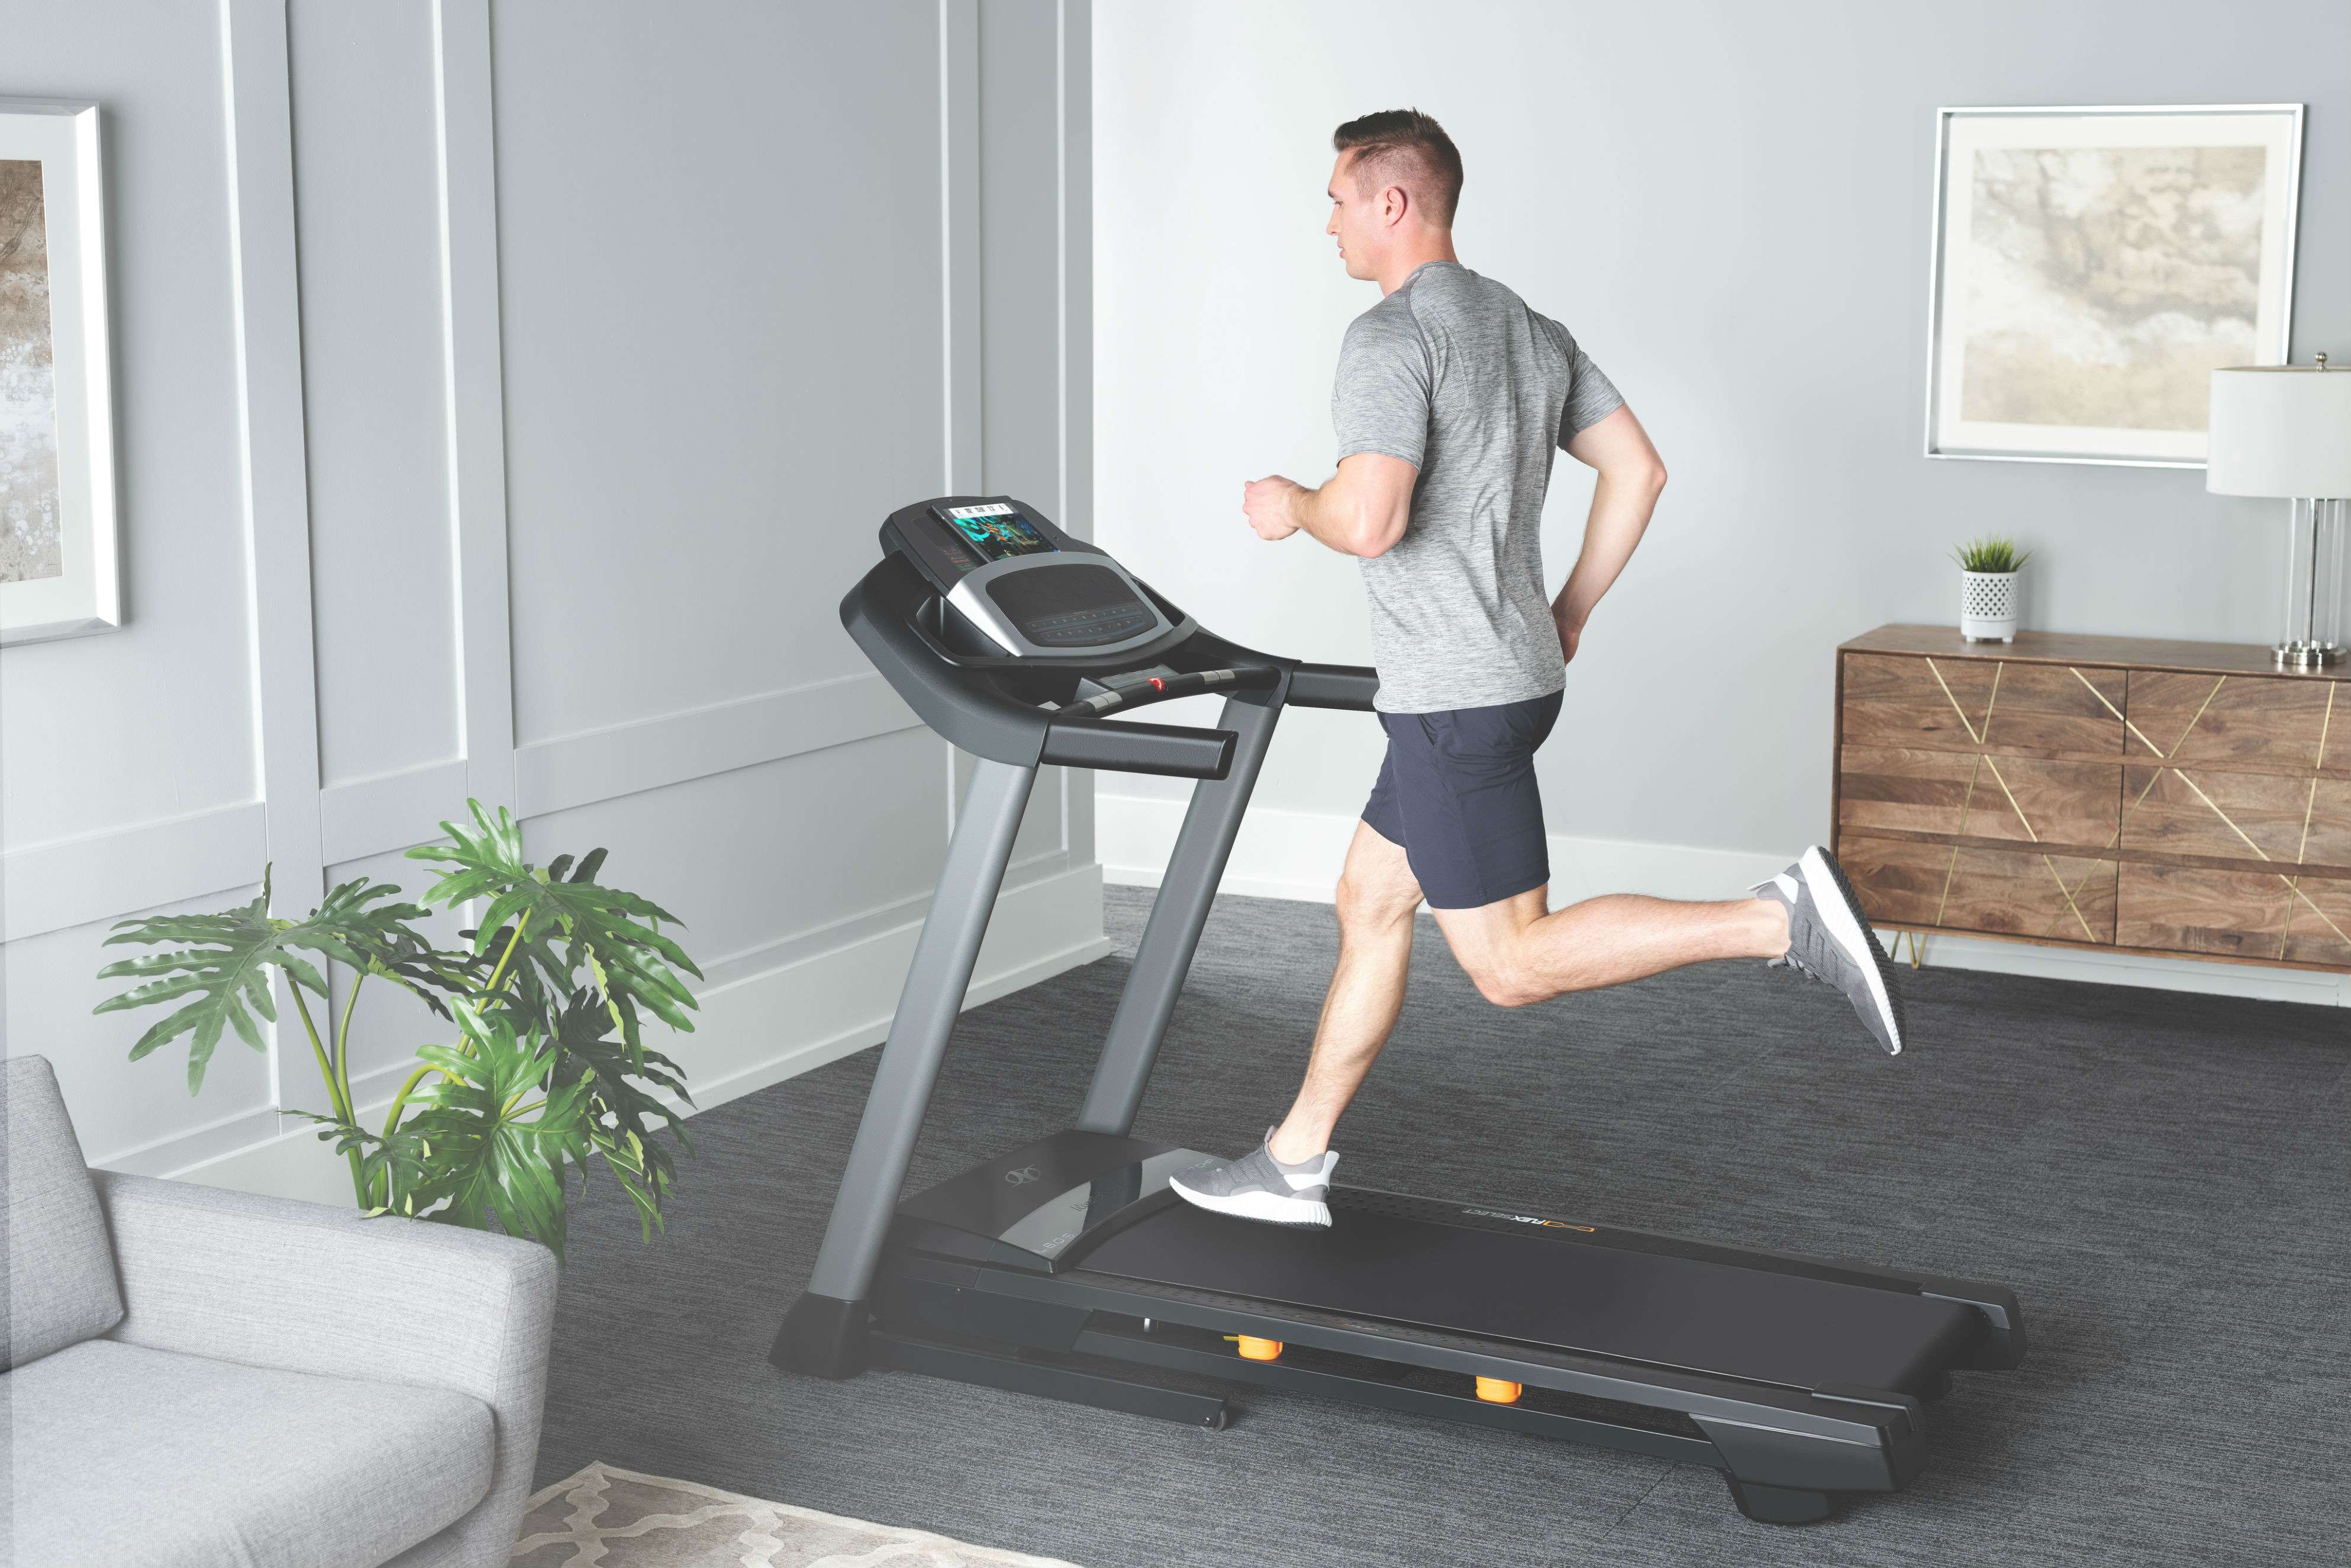 How To Unfold A Treadmill
